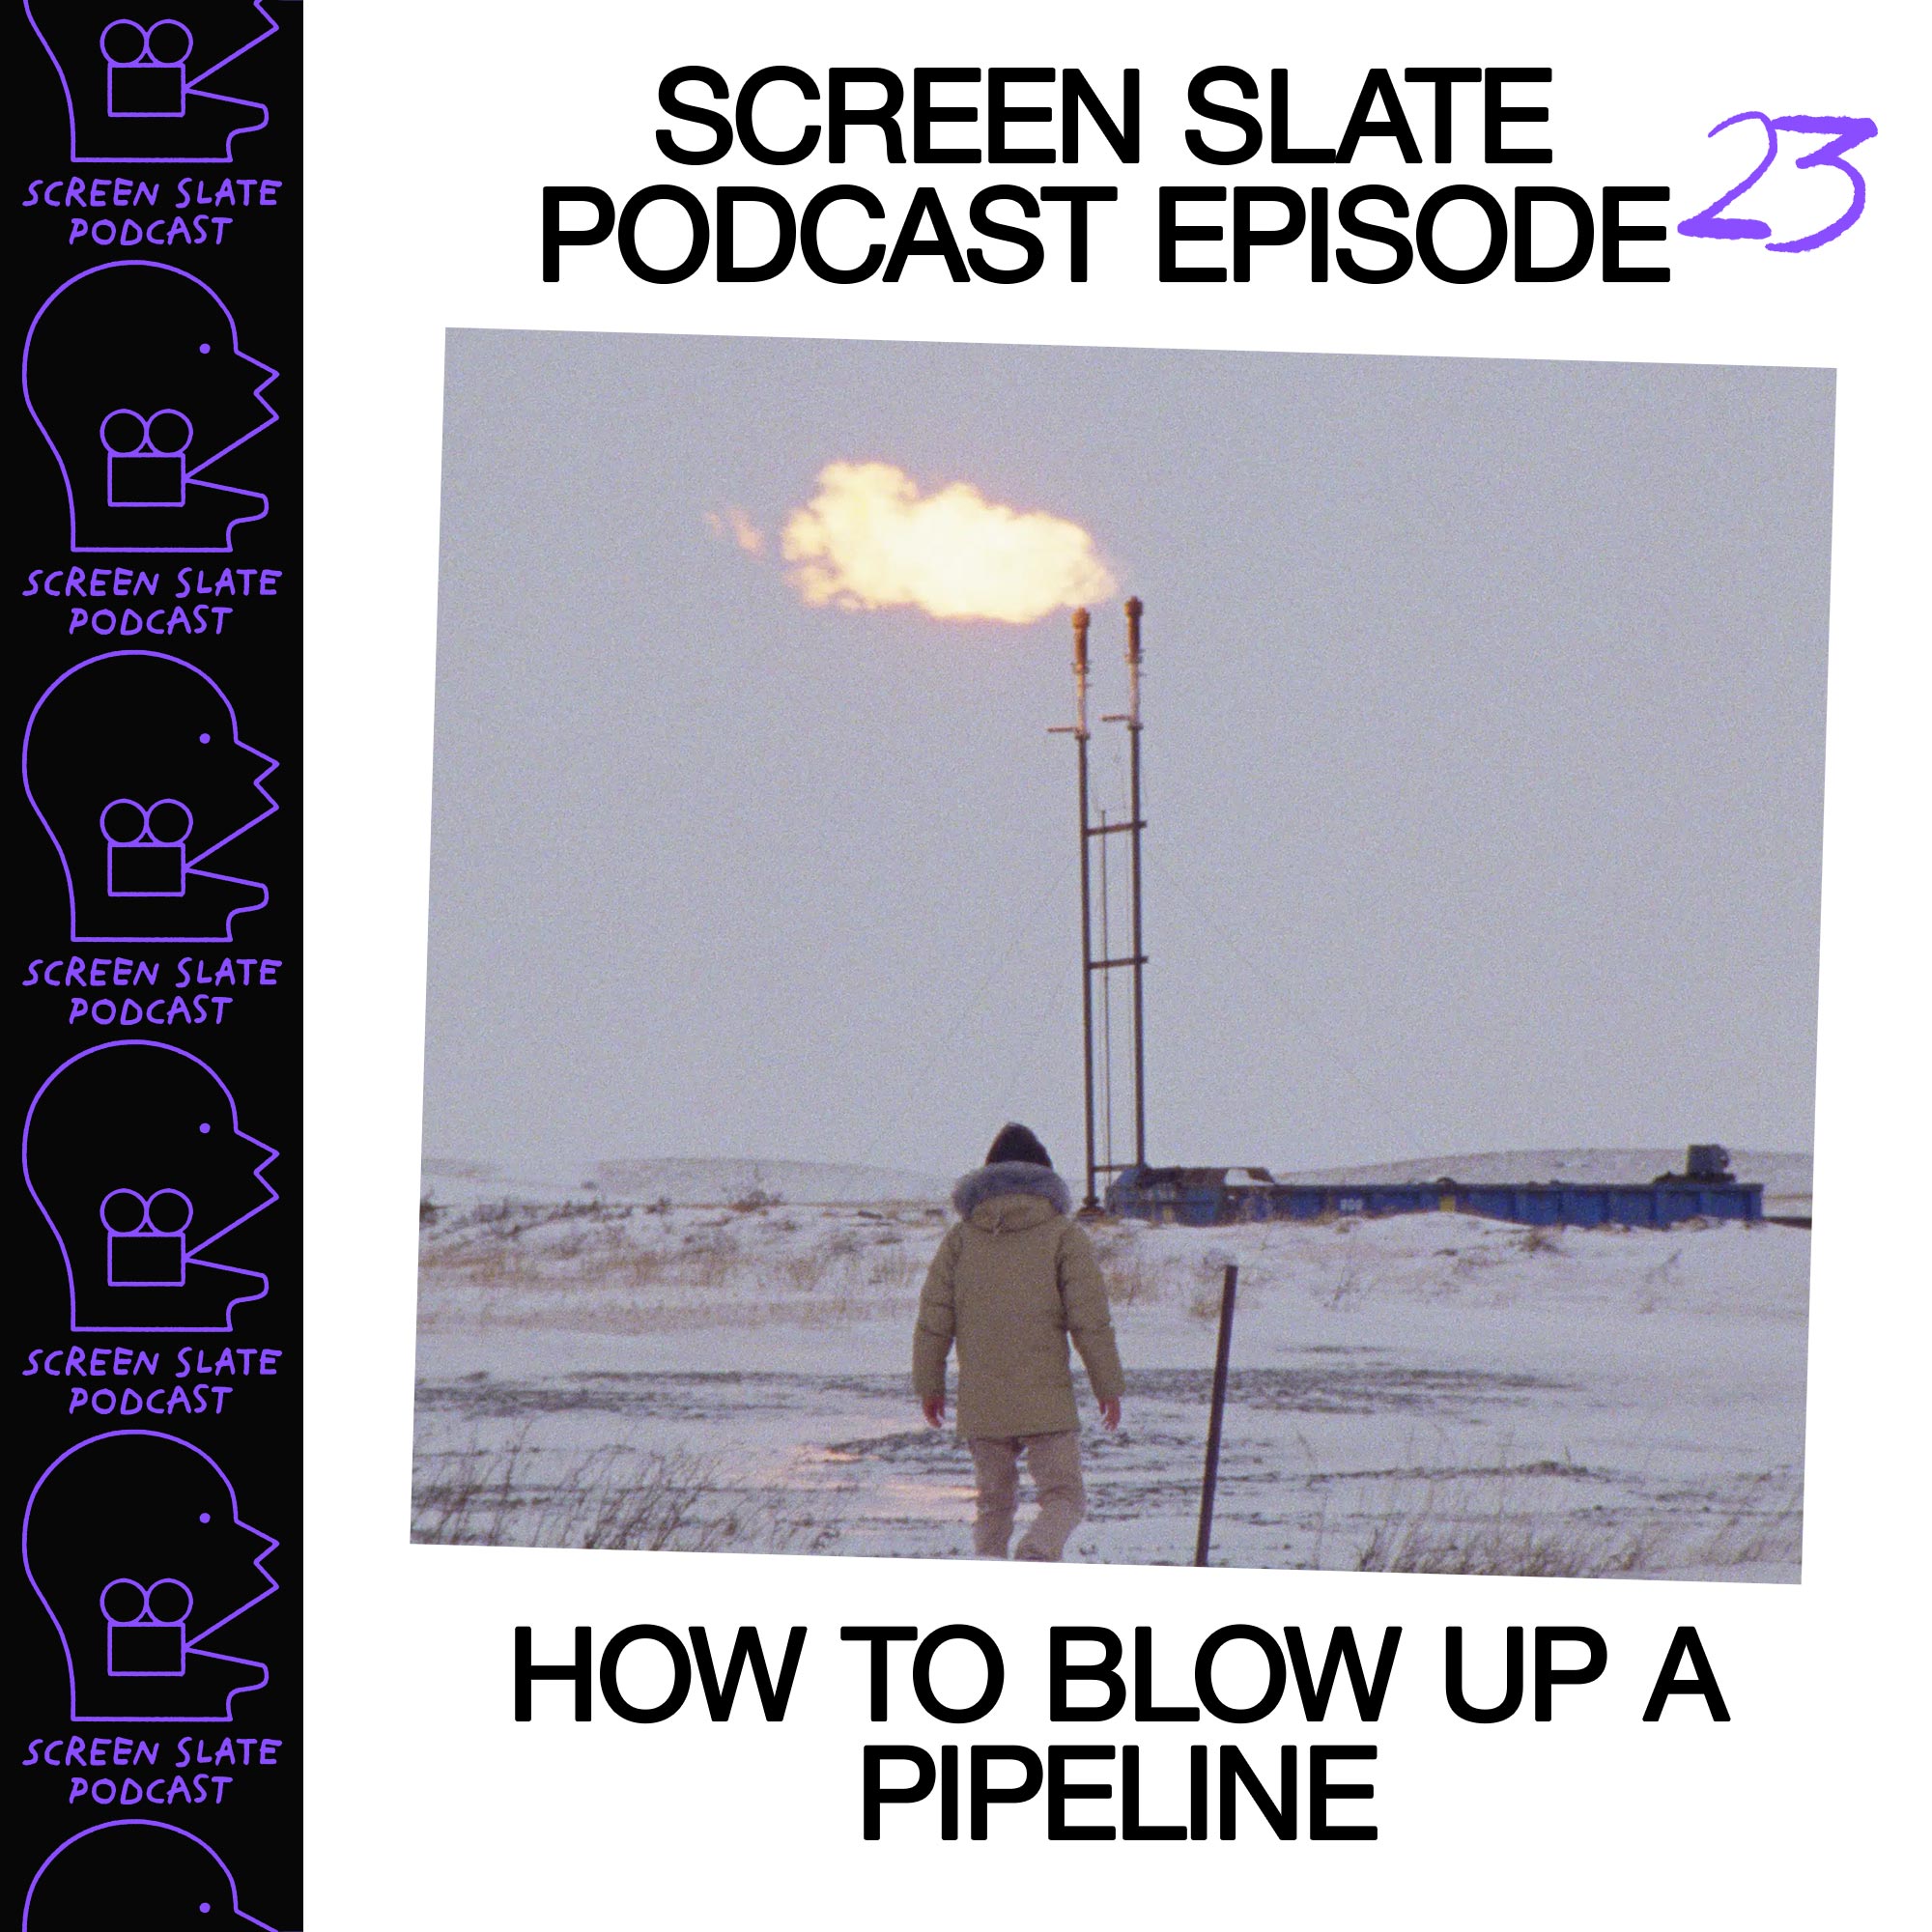 Podcast Episode 23 - How to Blow Up a Pipeline